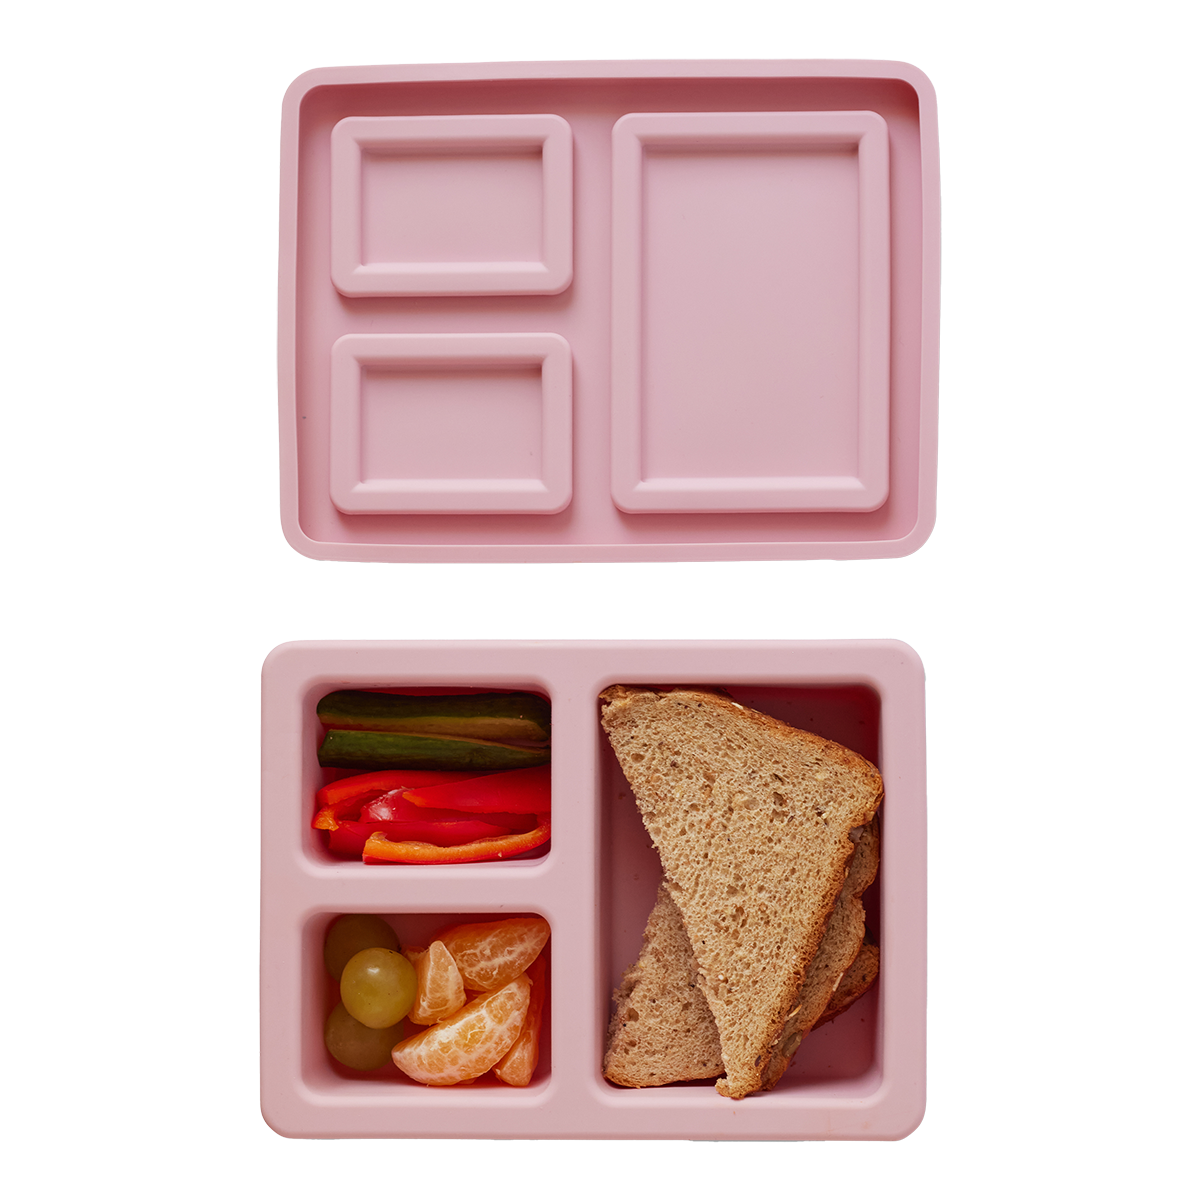 What's in YOUR Bento? Baby Edition…